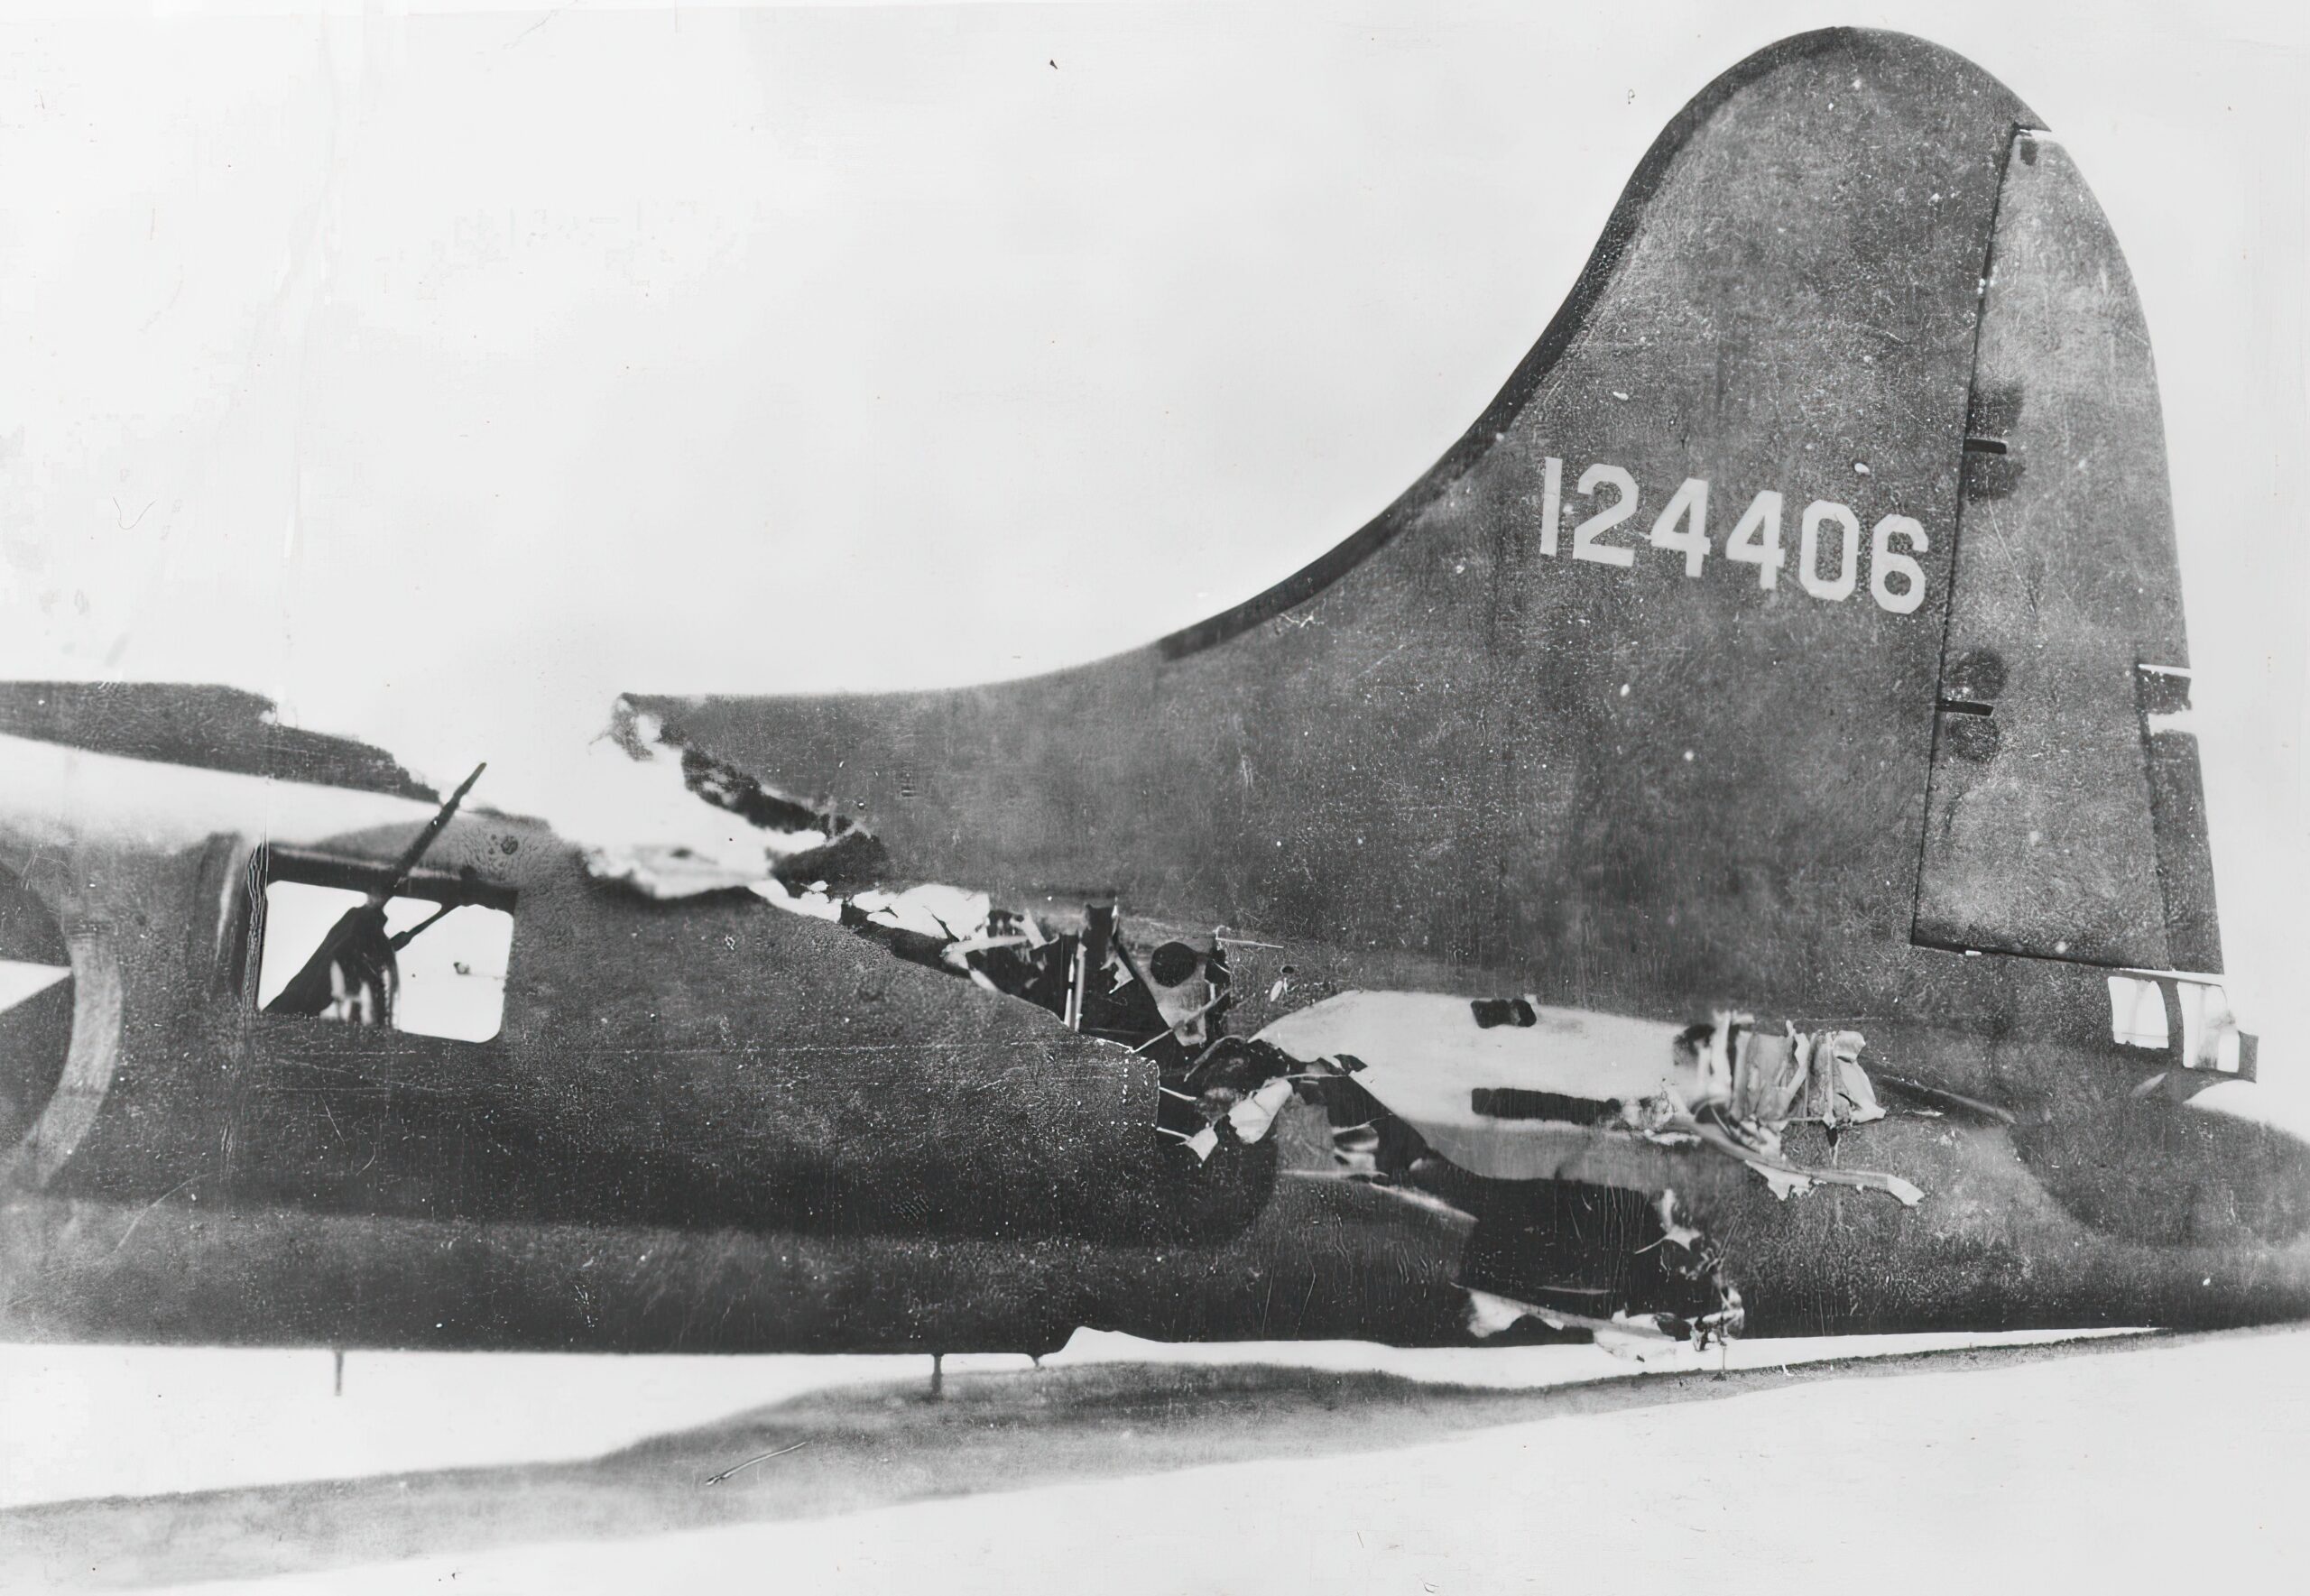 Close-up of the damaged tail of the Boeing B-17F-5-BO (S/N 41-24406) "All American III." The left horizontal stabilizer was torn completely off, and the aircraft was nearly cut in half by the collision